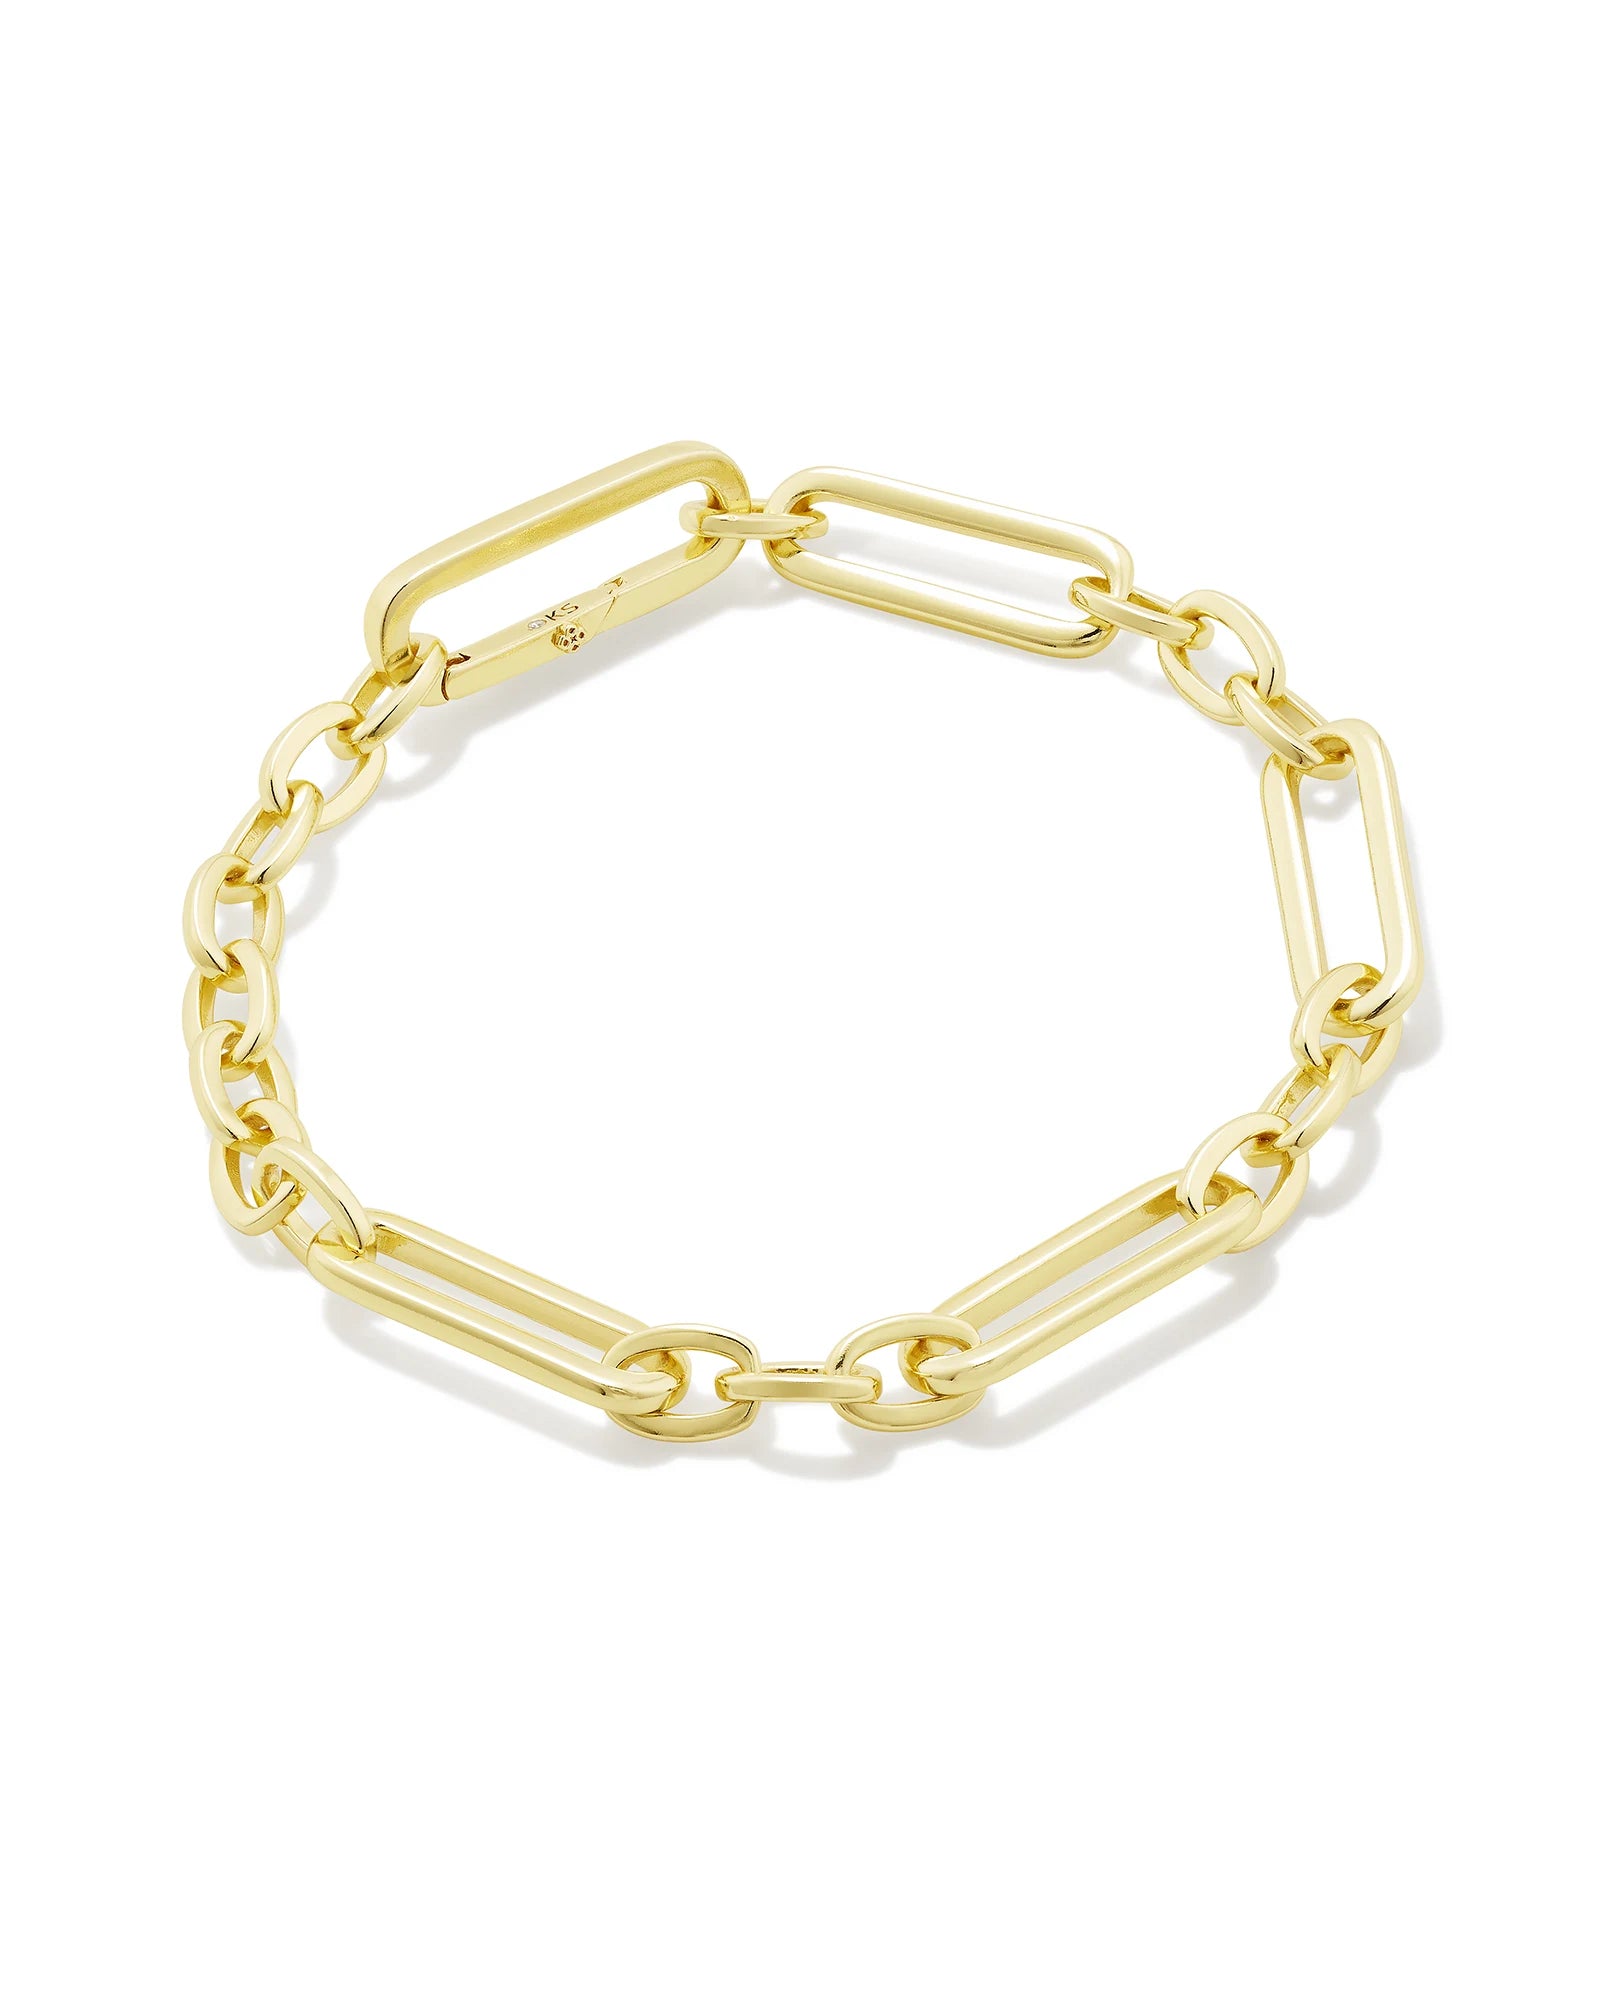 Kendra Scott Heather Link And Chain Bracelet in Gold